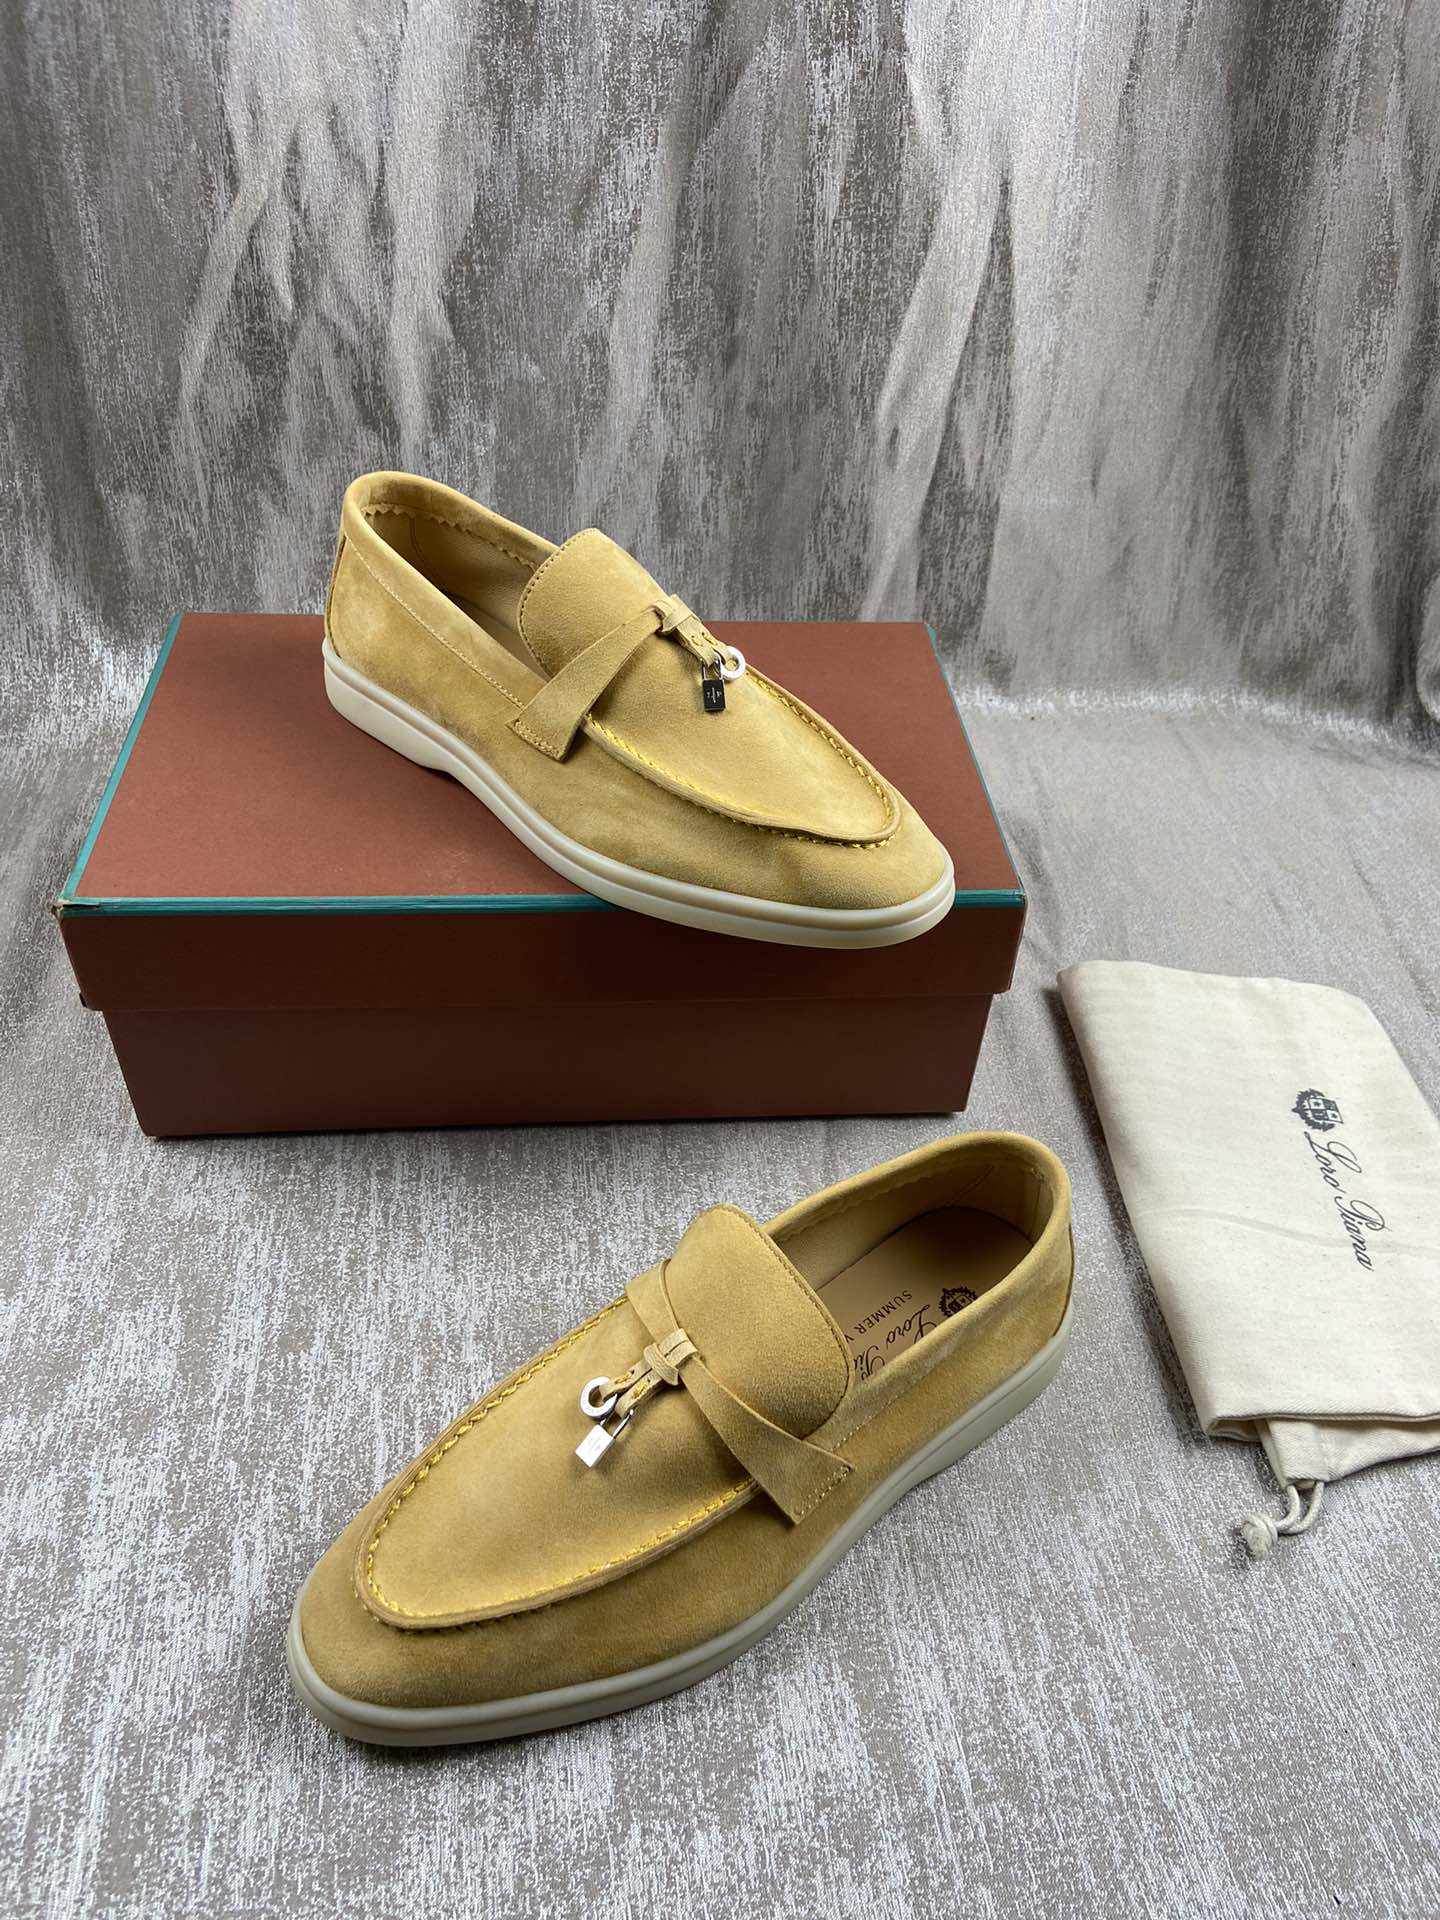 Shop the Best High Quality
 Loro Piana Skateboard Shoes Loafers Single Layer Shoes Sewing Rubber Sheepskin Fashion Low Tops